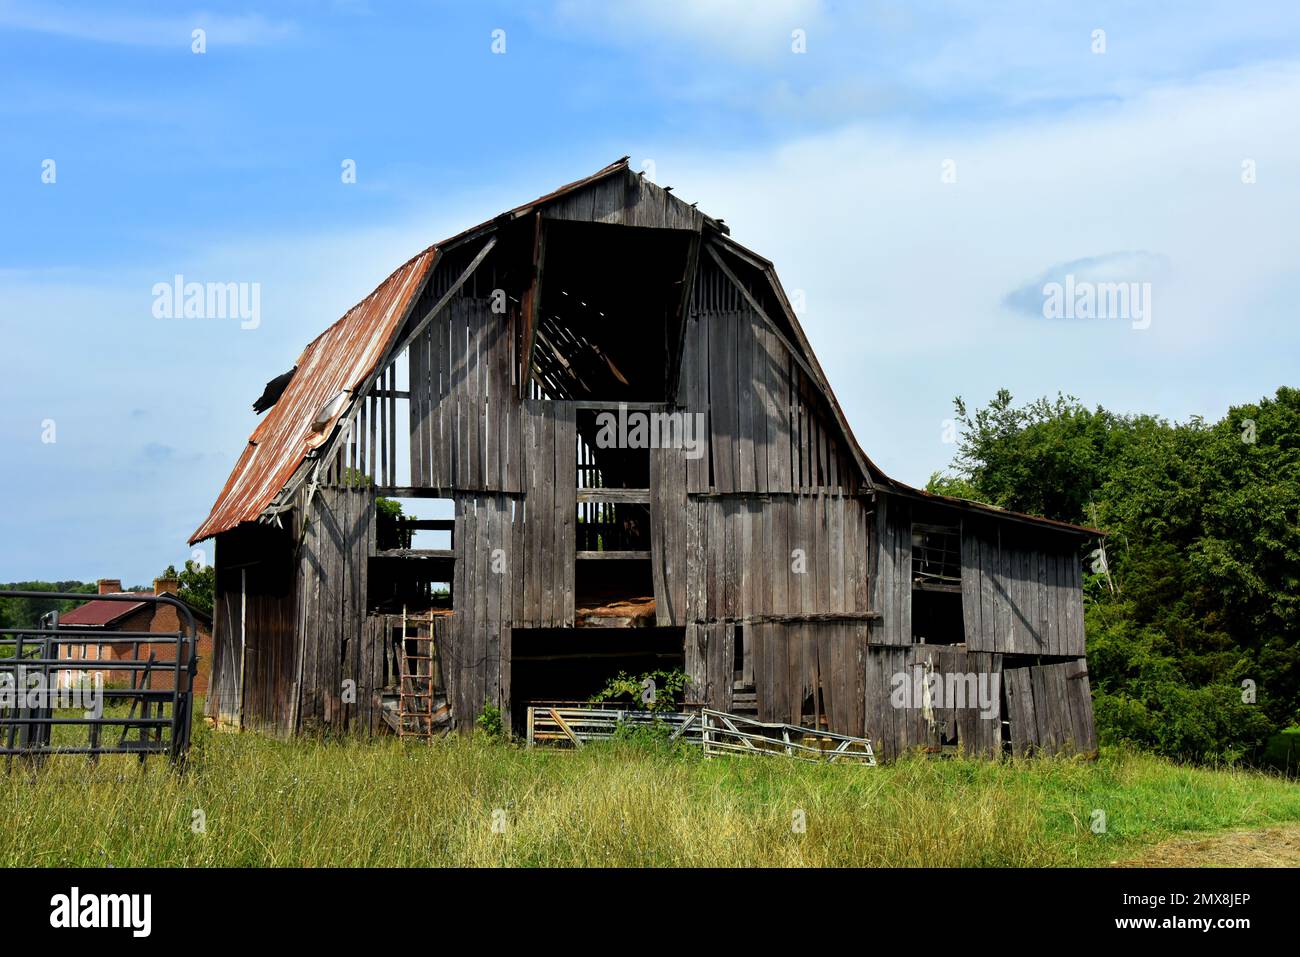 Abandoned wooden barn is broken down with missing boards, rusting tin roof, and broken down gate. Stock Photo